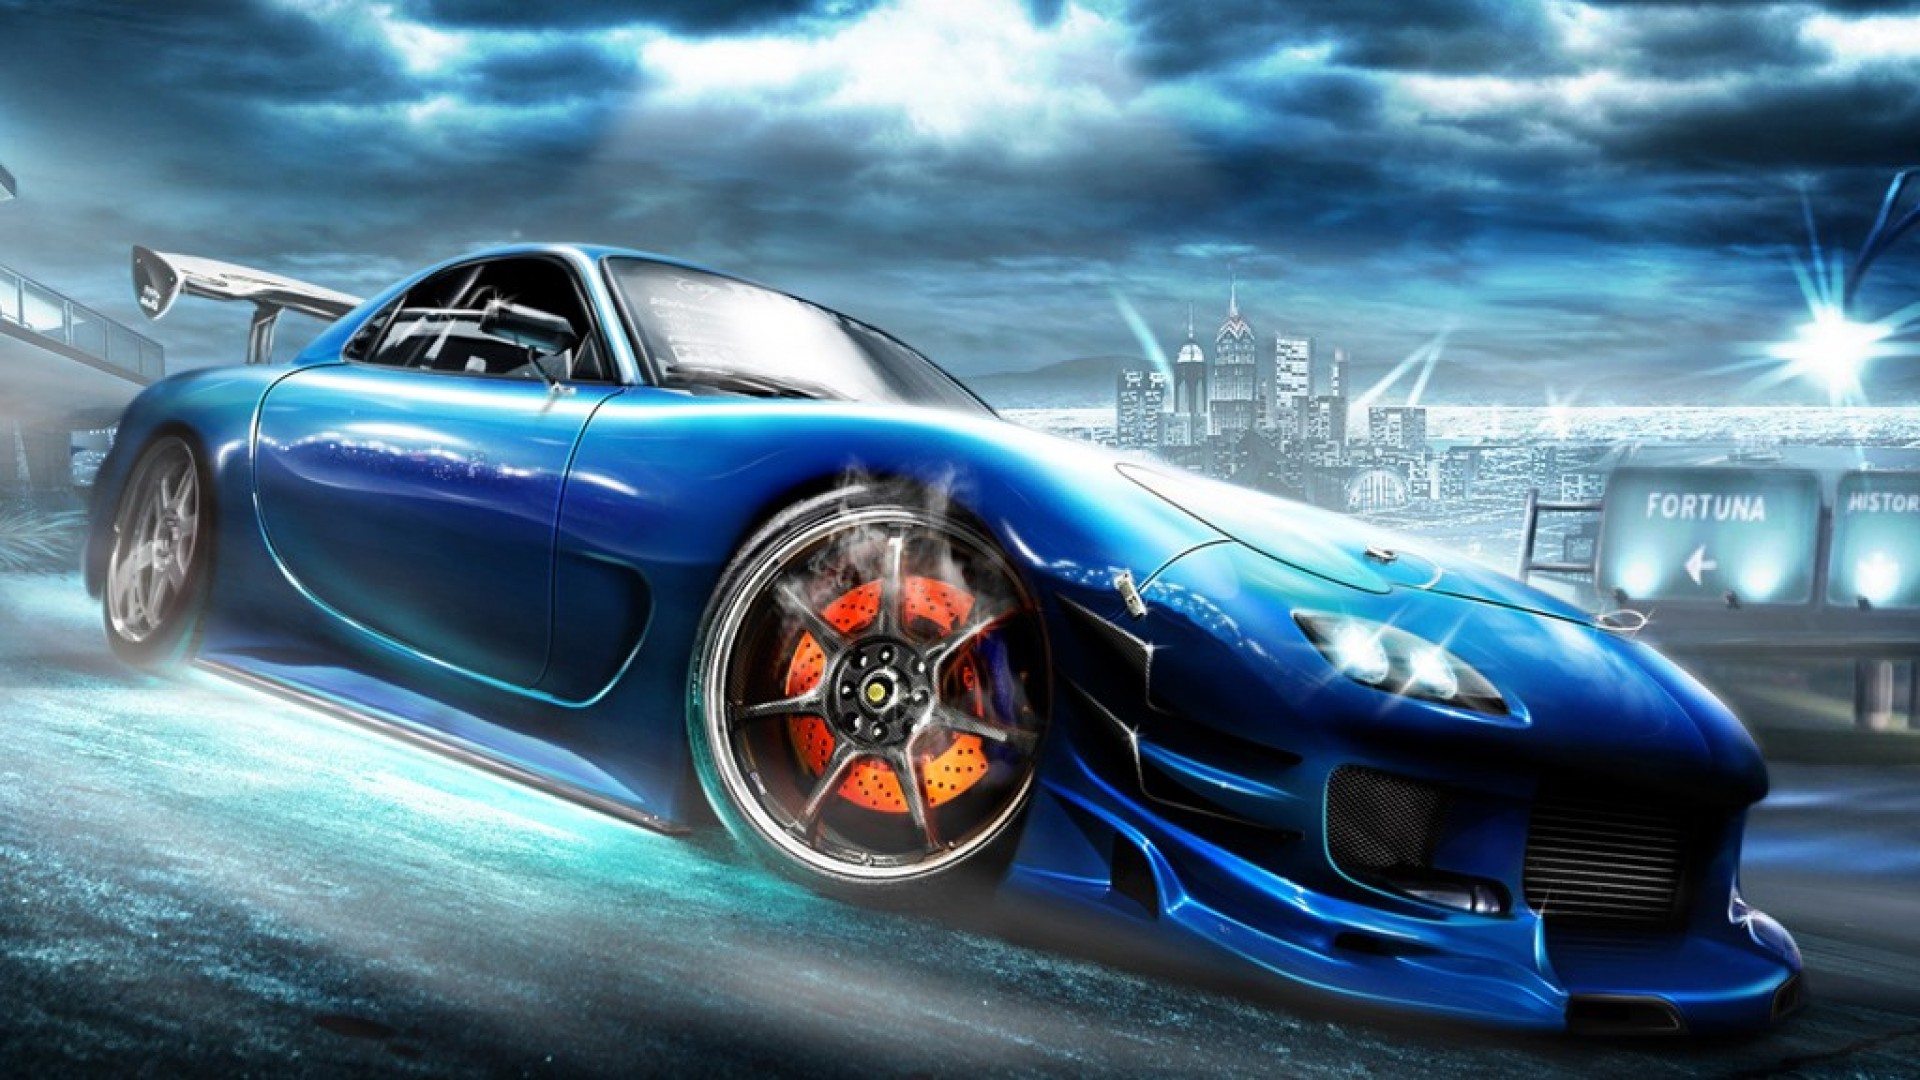 Free Download Mazda Rx7 Wallpapers 19x1080 For Your Desktop Mobile Tablet Explore 70 Mazda Rx7 Wallpaper Rx 7 Wallpaper Mazda Cx 5 Wallpaper Mad Mike Rx7 Wallpaper